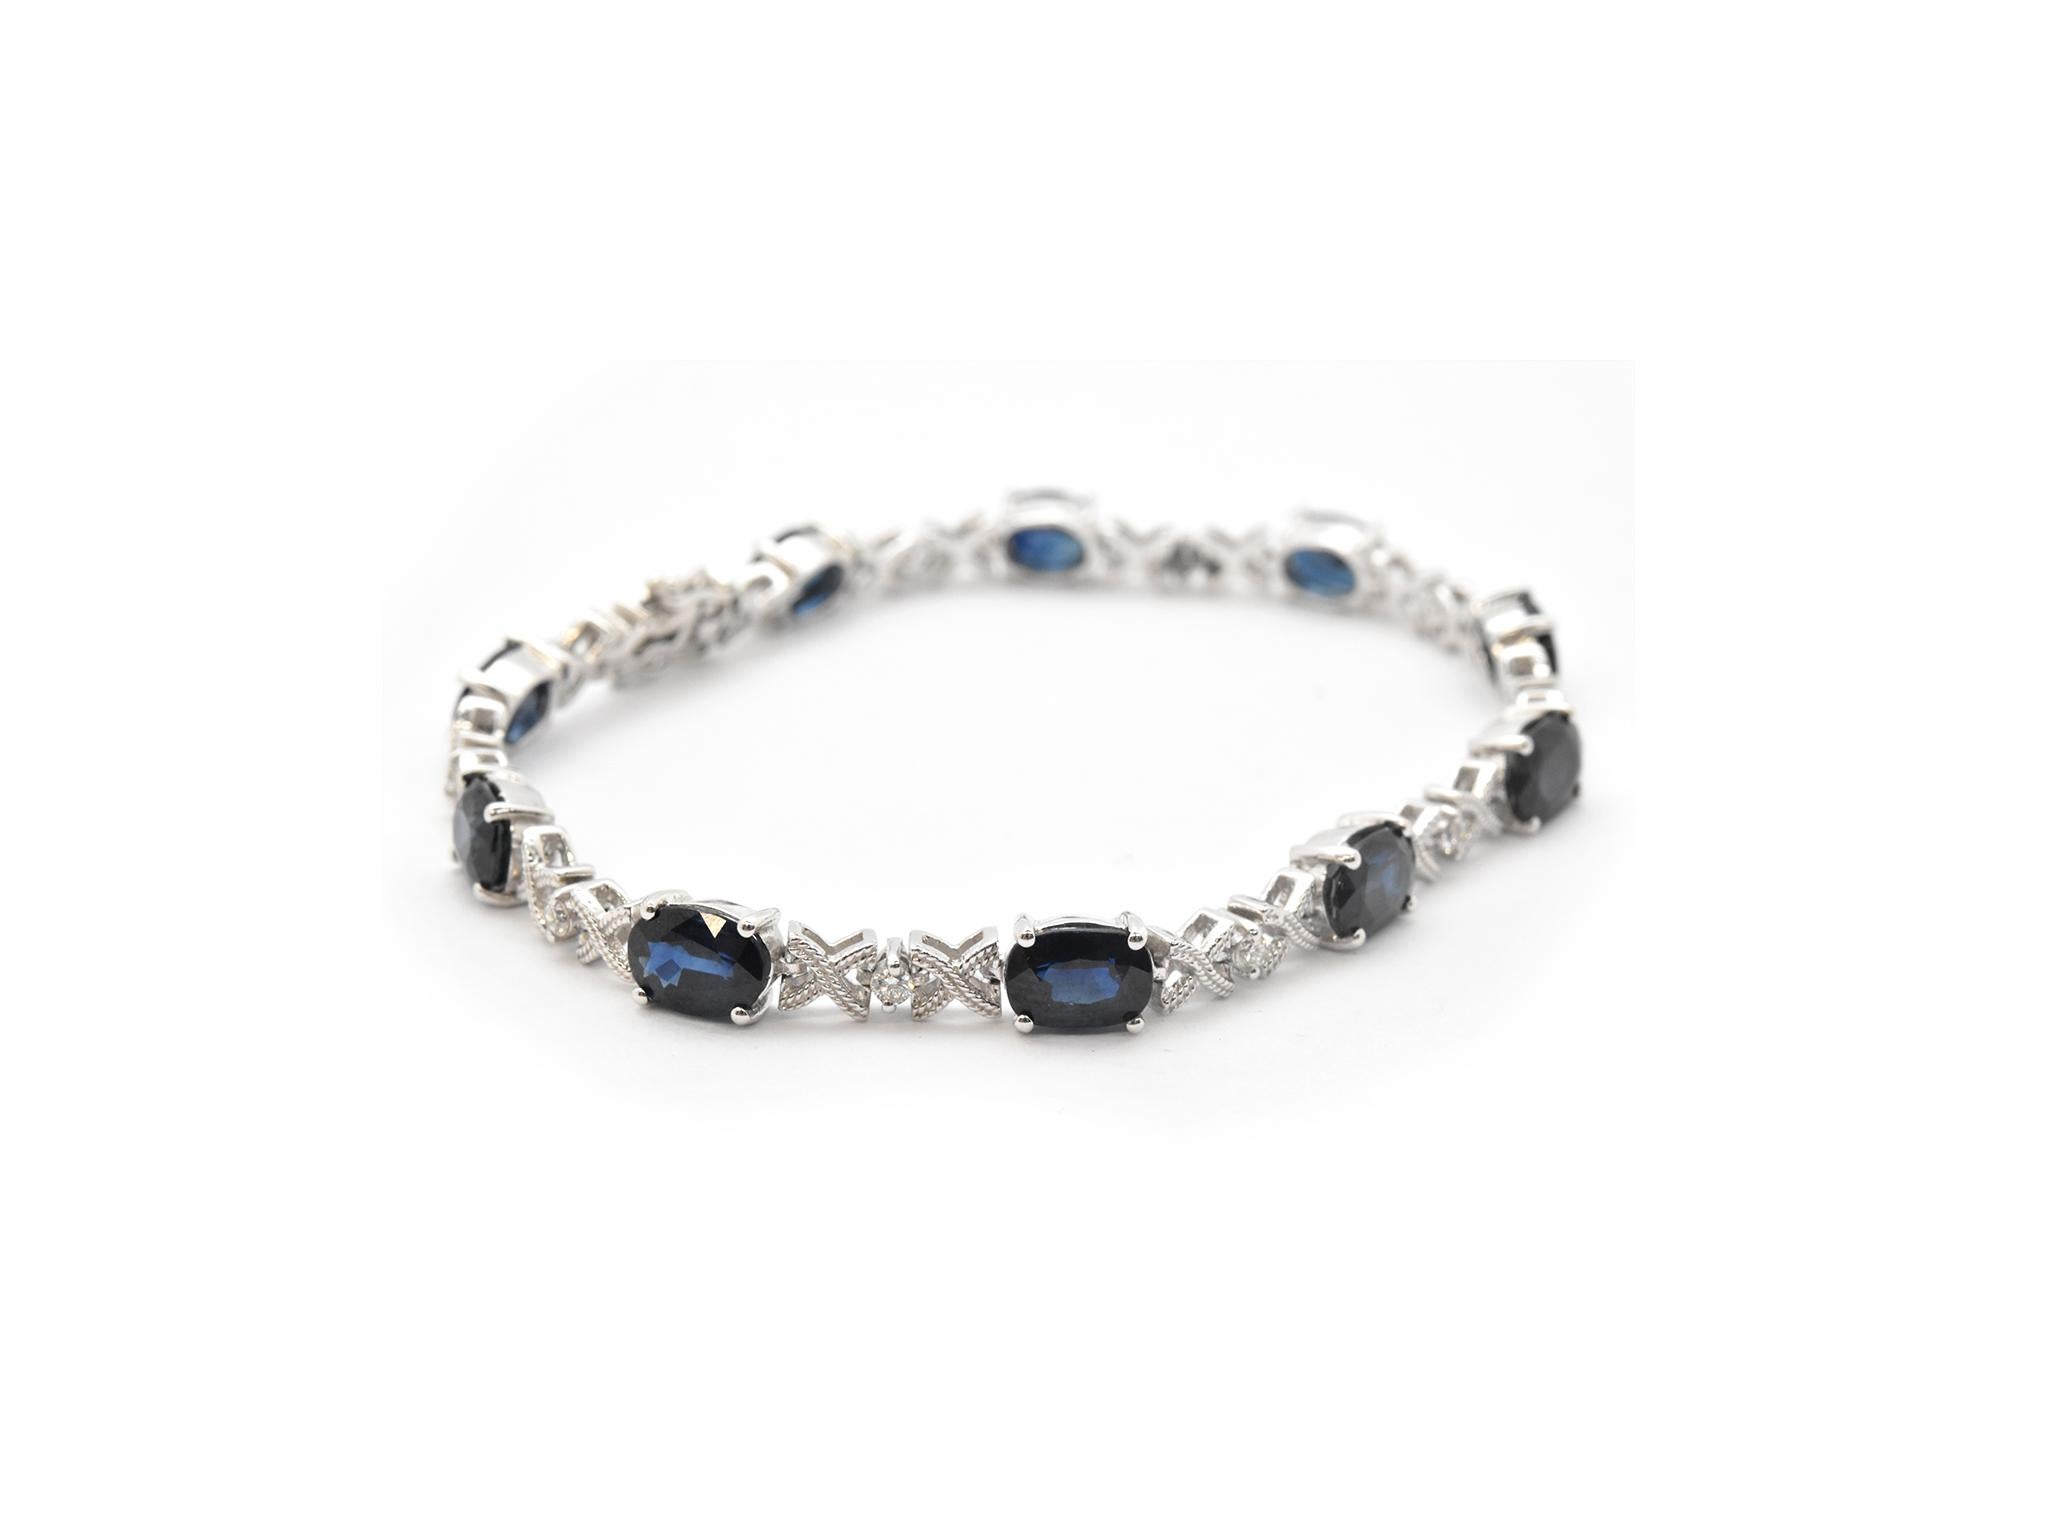 This sapphire and diamond “X” style bracelet is designed in 14k white gold and set with 10 oval cut sapphires and accented with 10 round brilliant diamonds. In between each sapphire and diamond is an “X” with a granulated texture. Diamonds reach